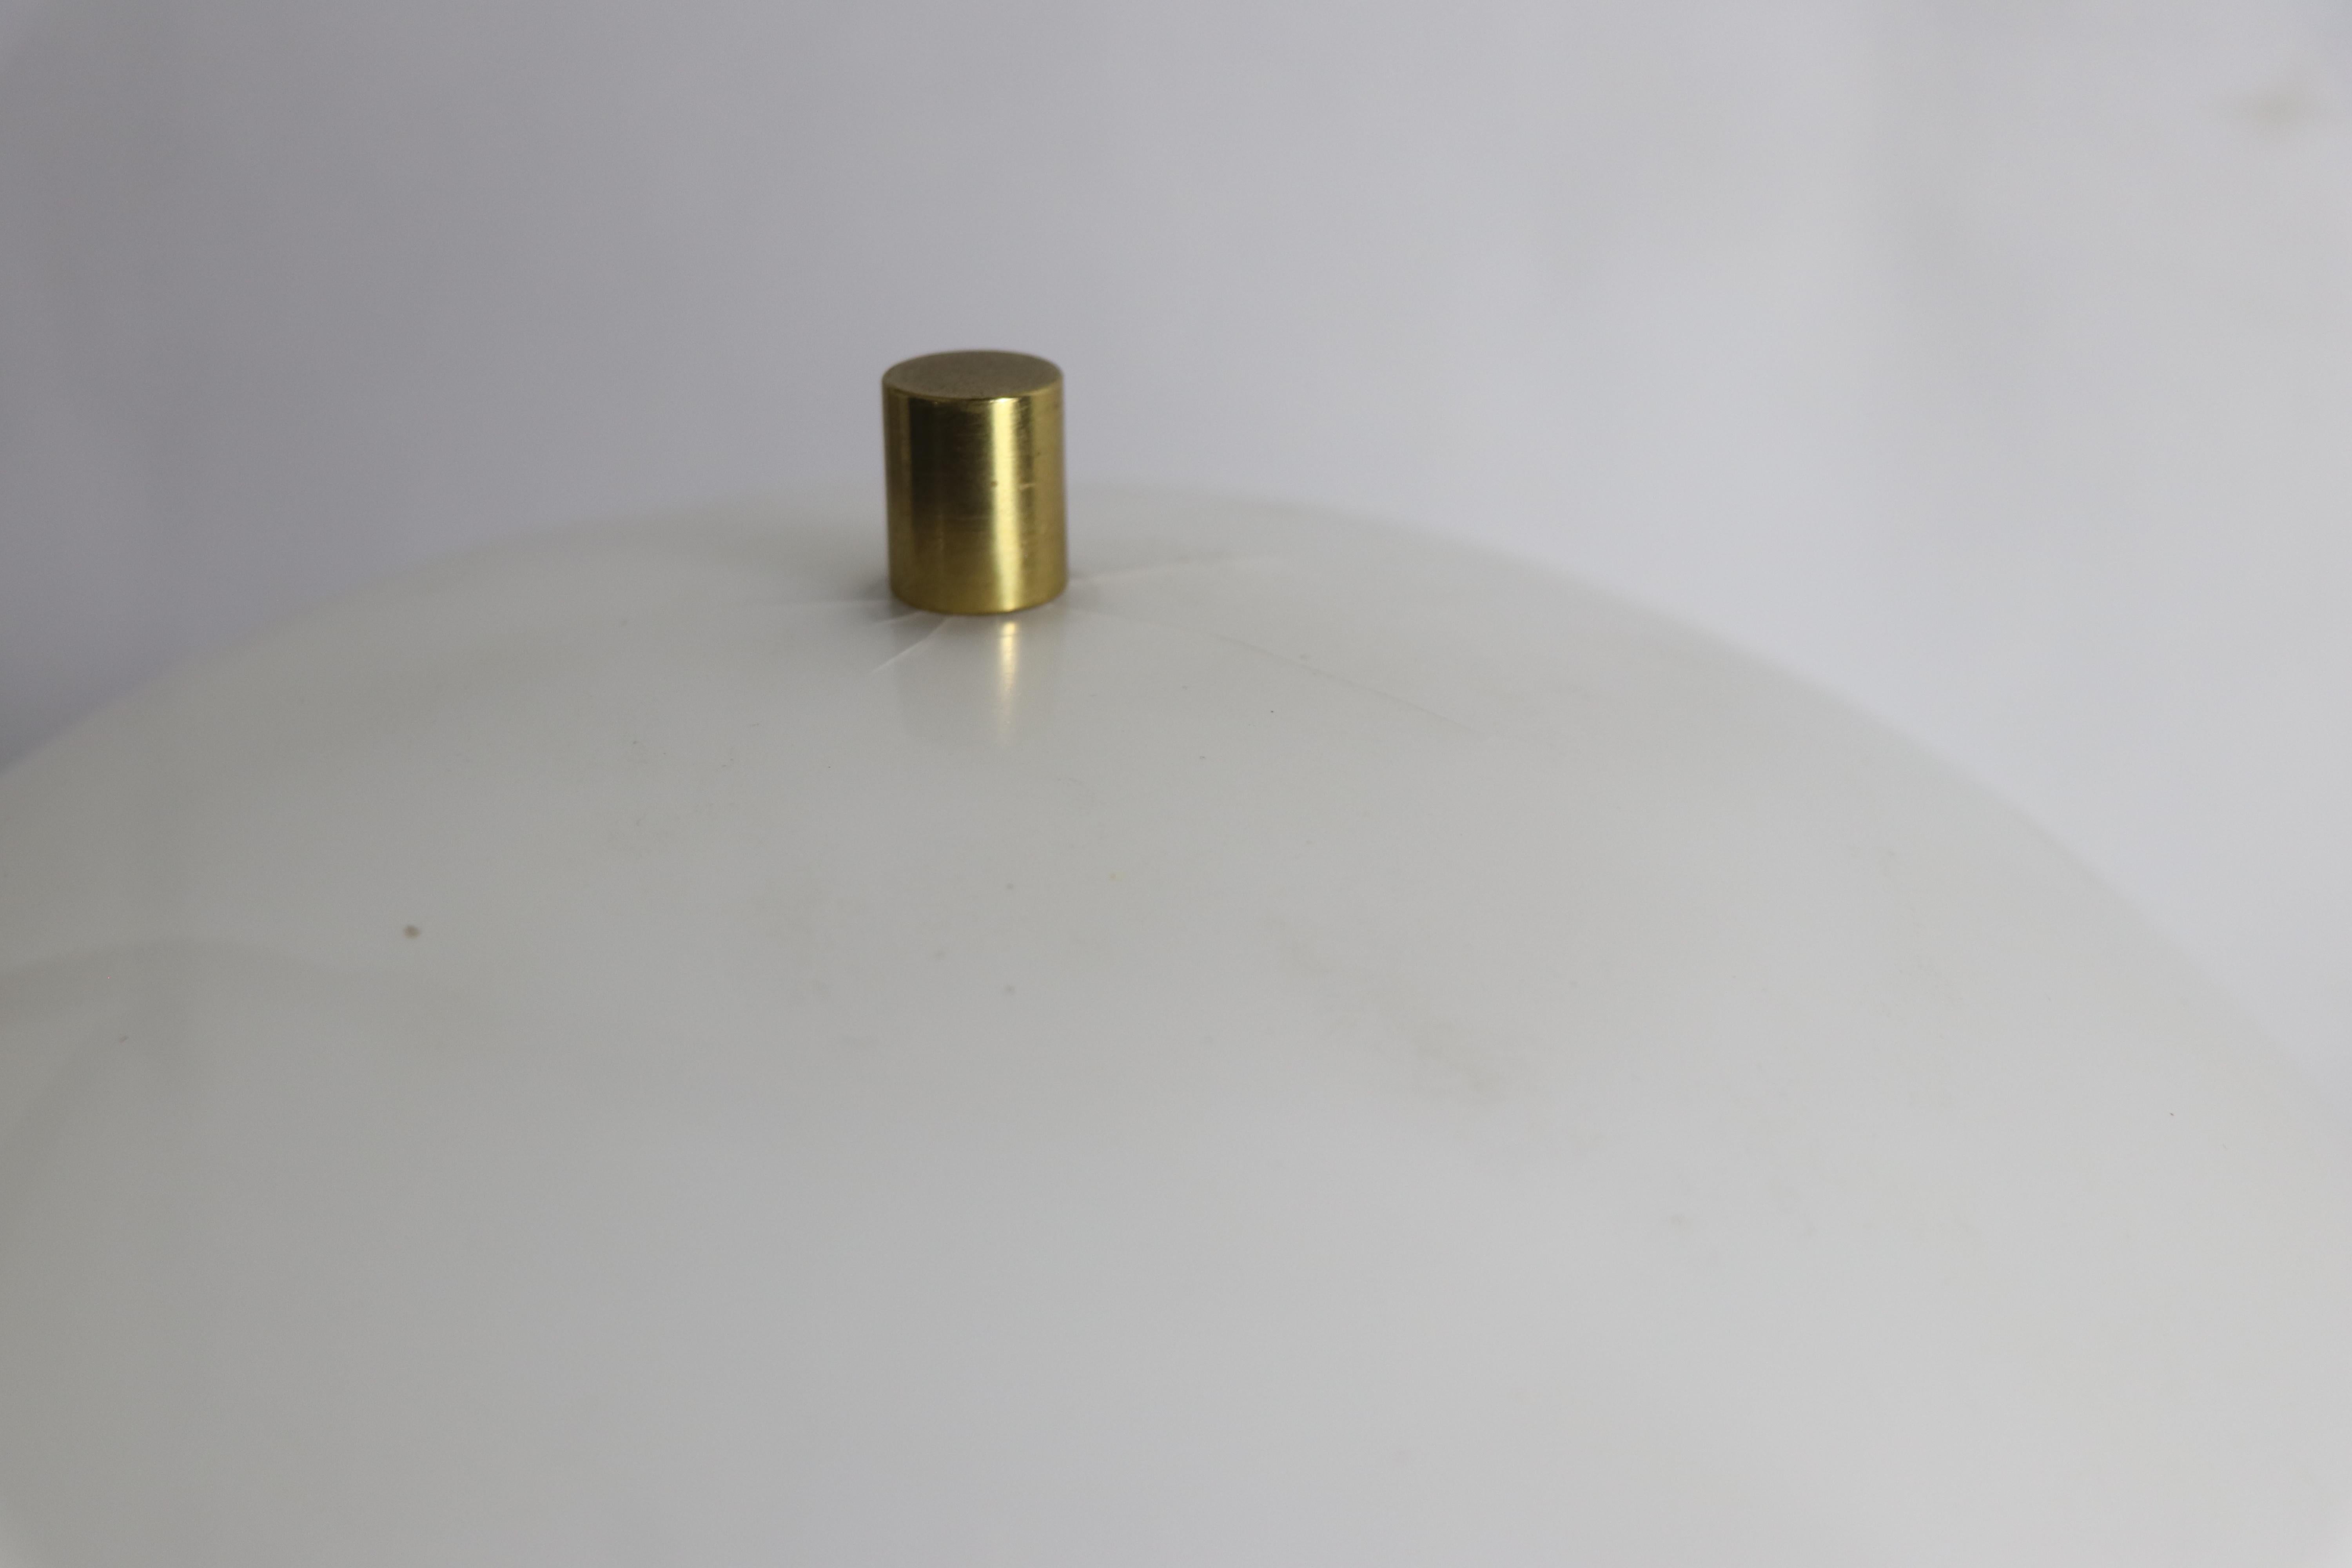 Architectural modernist table lamp attributed to Gerald Thurston for Lightolier. The brass base features a dramatic arc foot which is 7.5 W x 4.75 D inches, which supports a plastic dome shade 12 diameter, x 6 H inches - there plastic shade has some